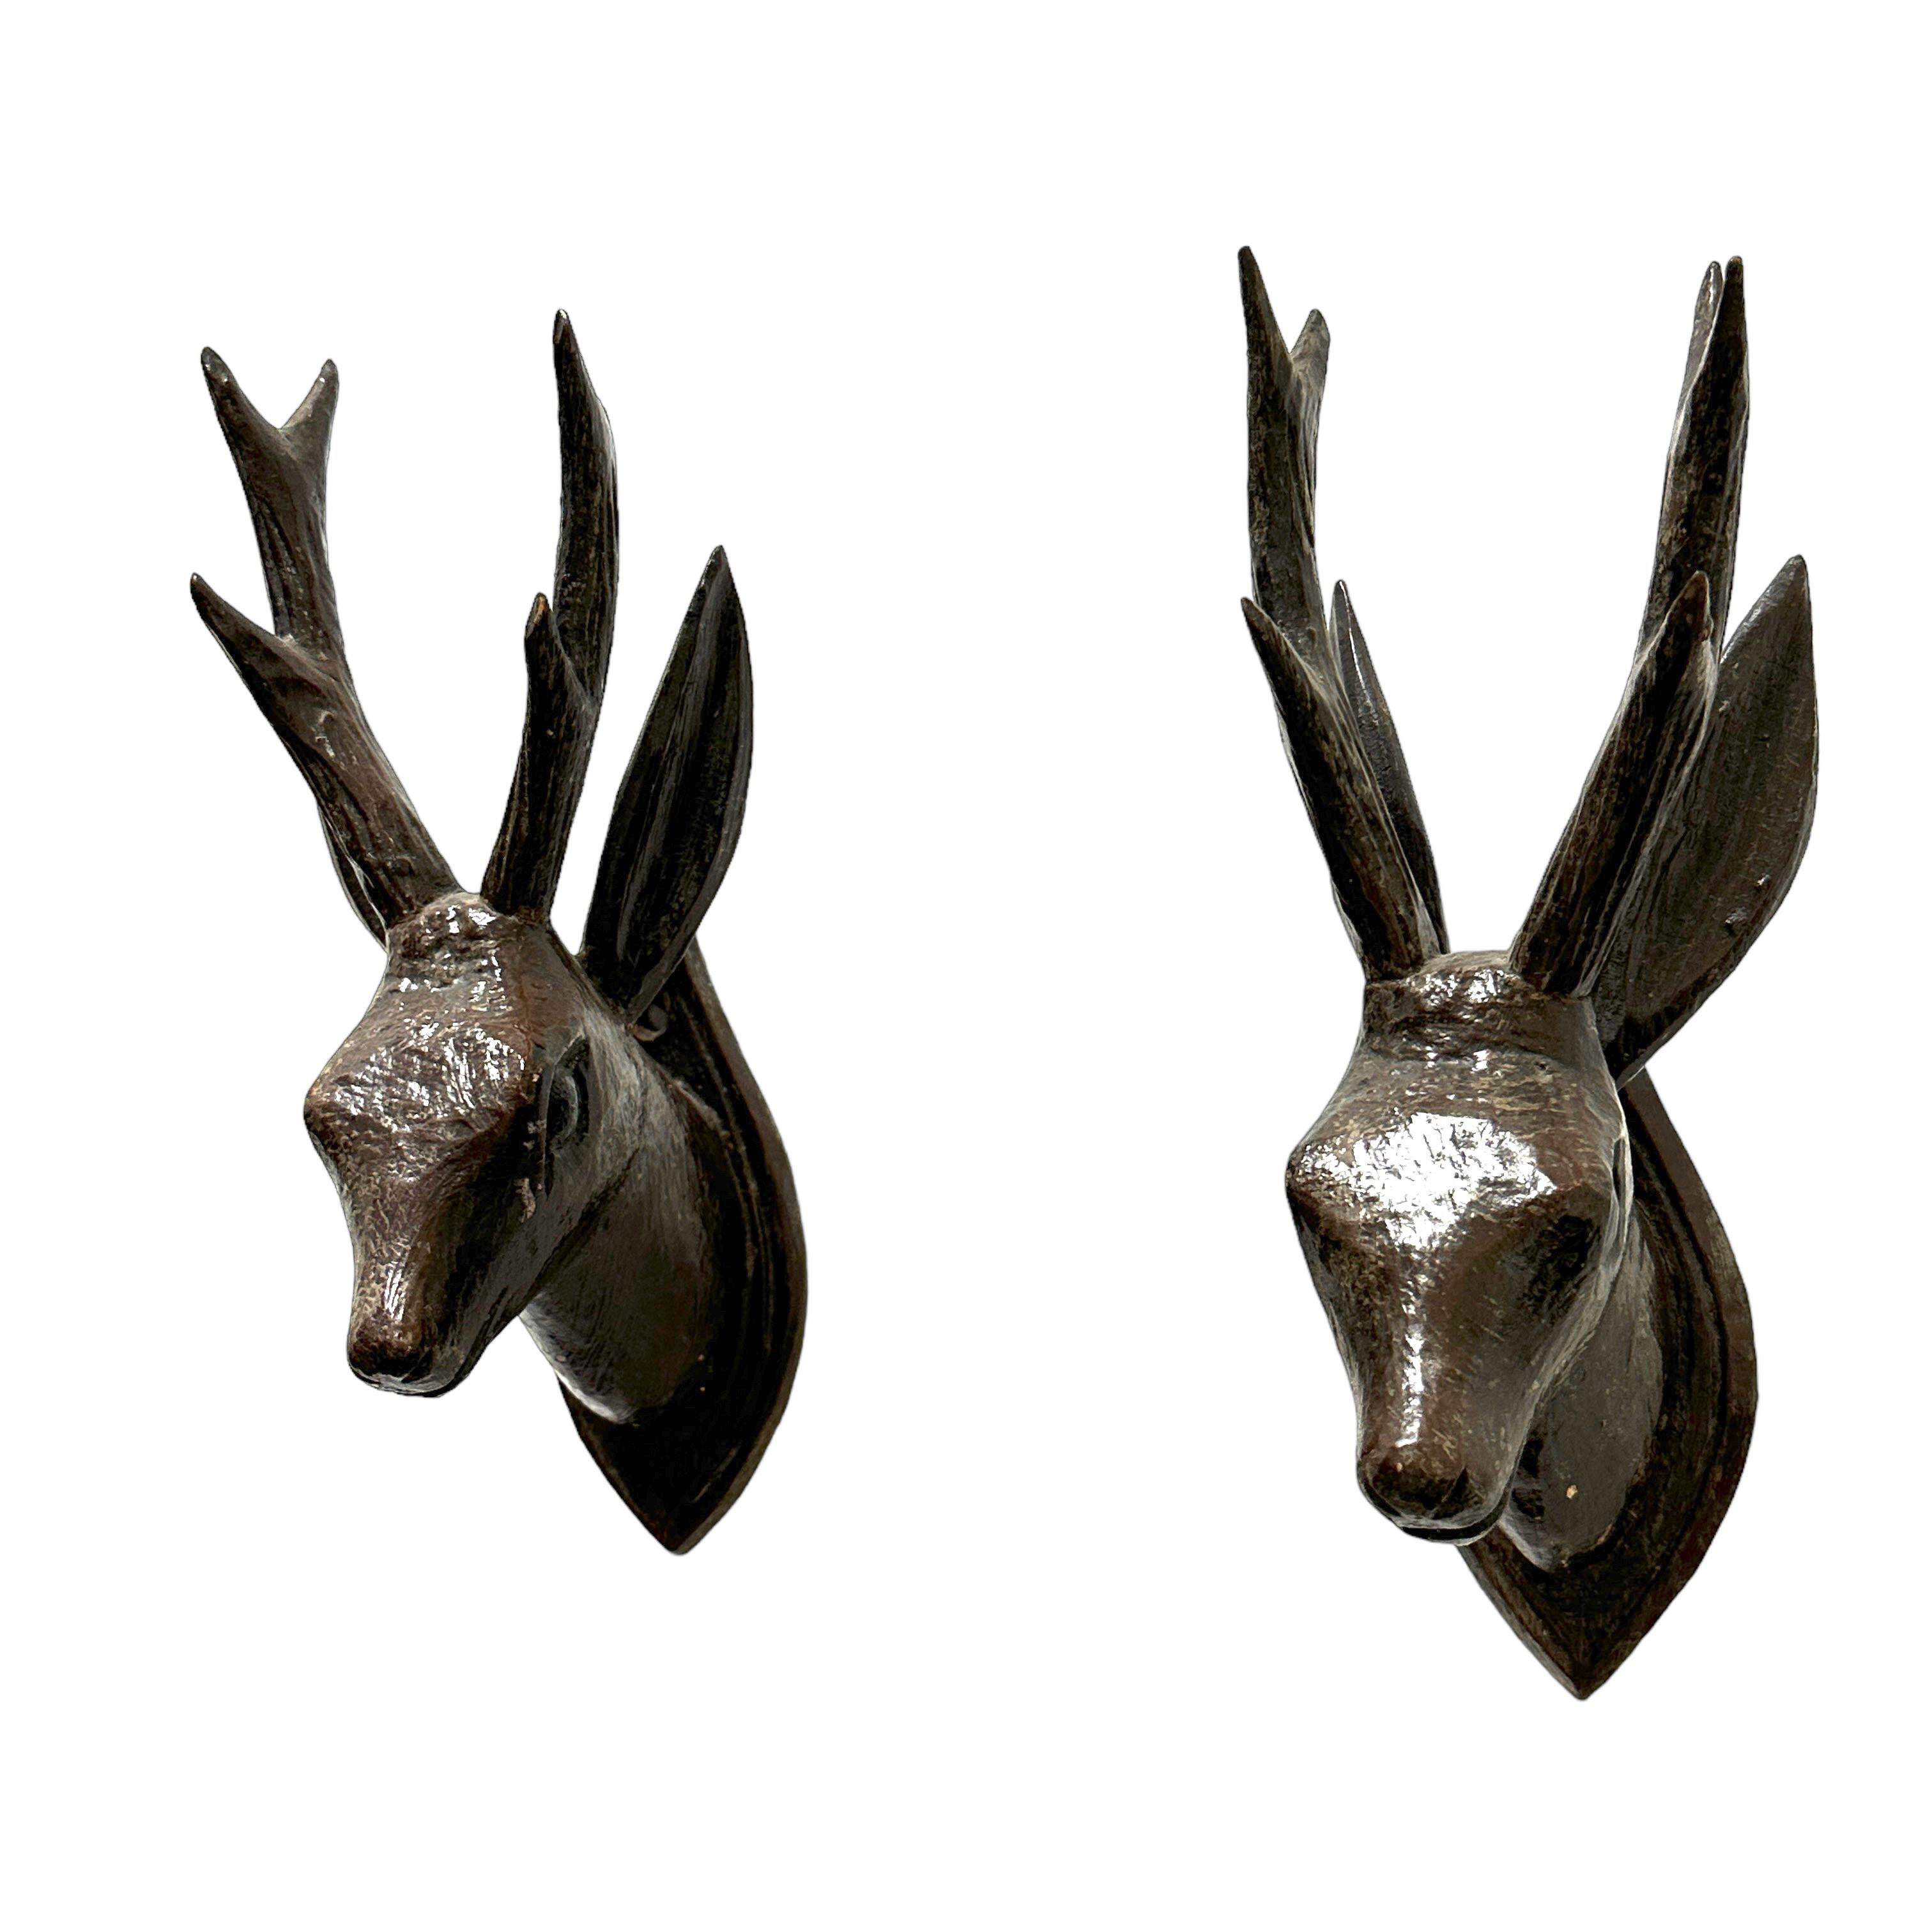 A great looking hand carved original wooden Folk Art pair of deer head wall decoration. A great piece for a suitable ambiance in a trophy room or the office of a Hunter or Woodsman. More than likely one of the Folk Art items made between 1860 and